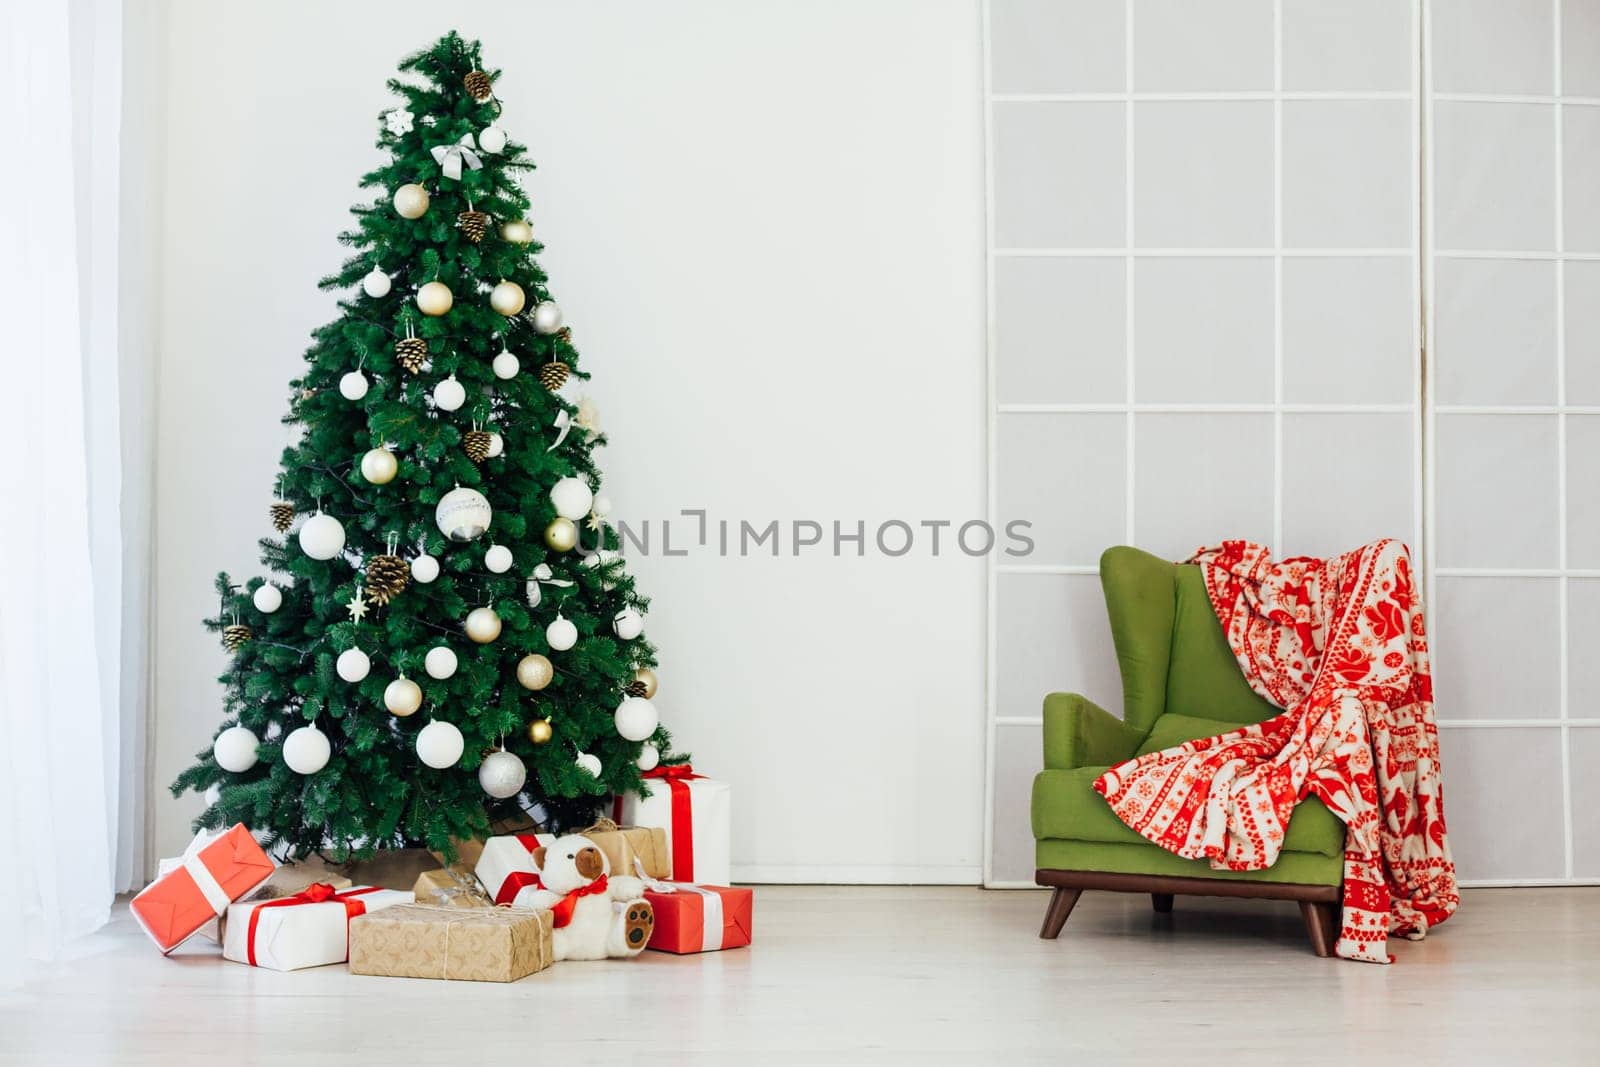 Christmas tree with gifts interior new year decor vintage holiday as background by Simakov